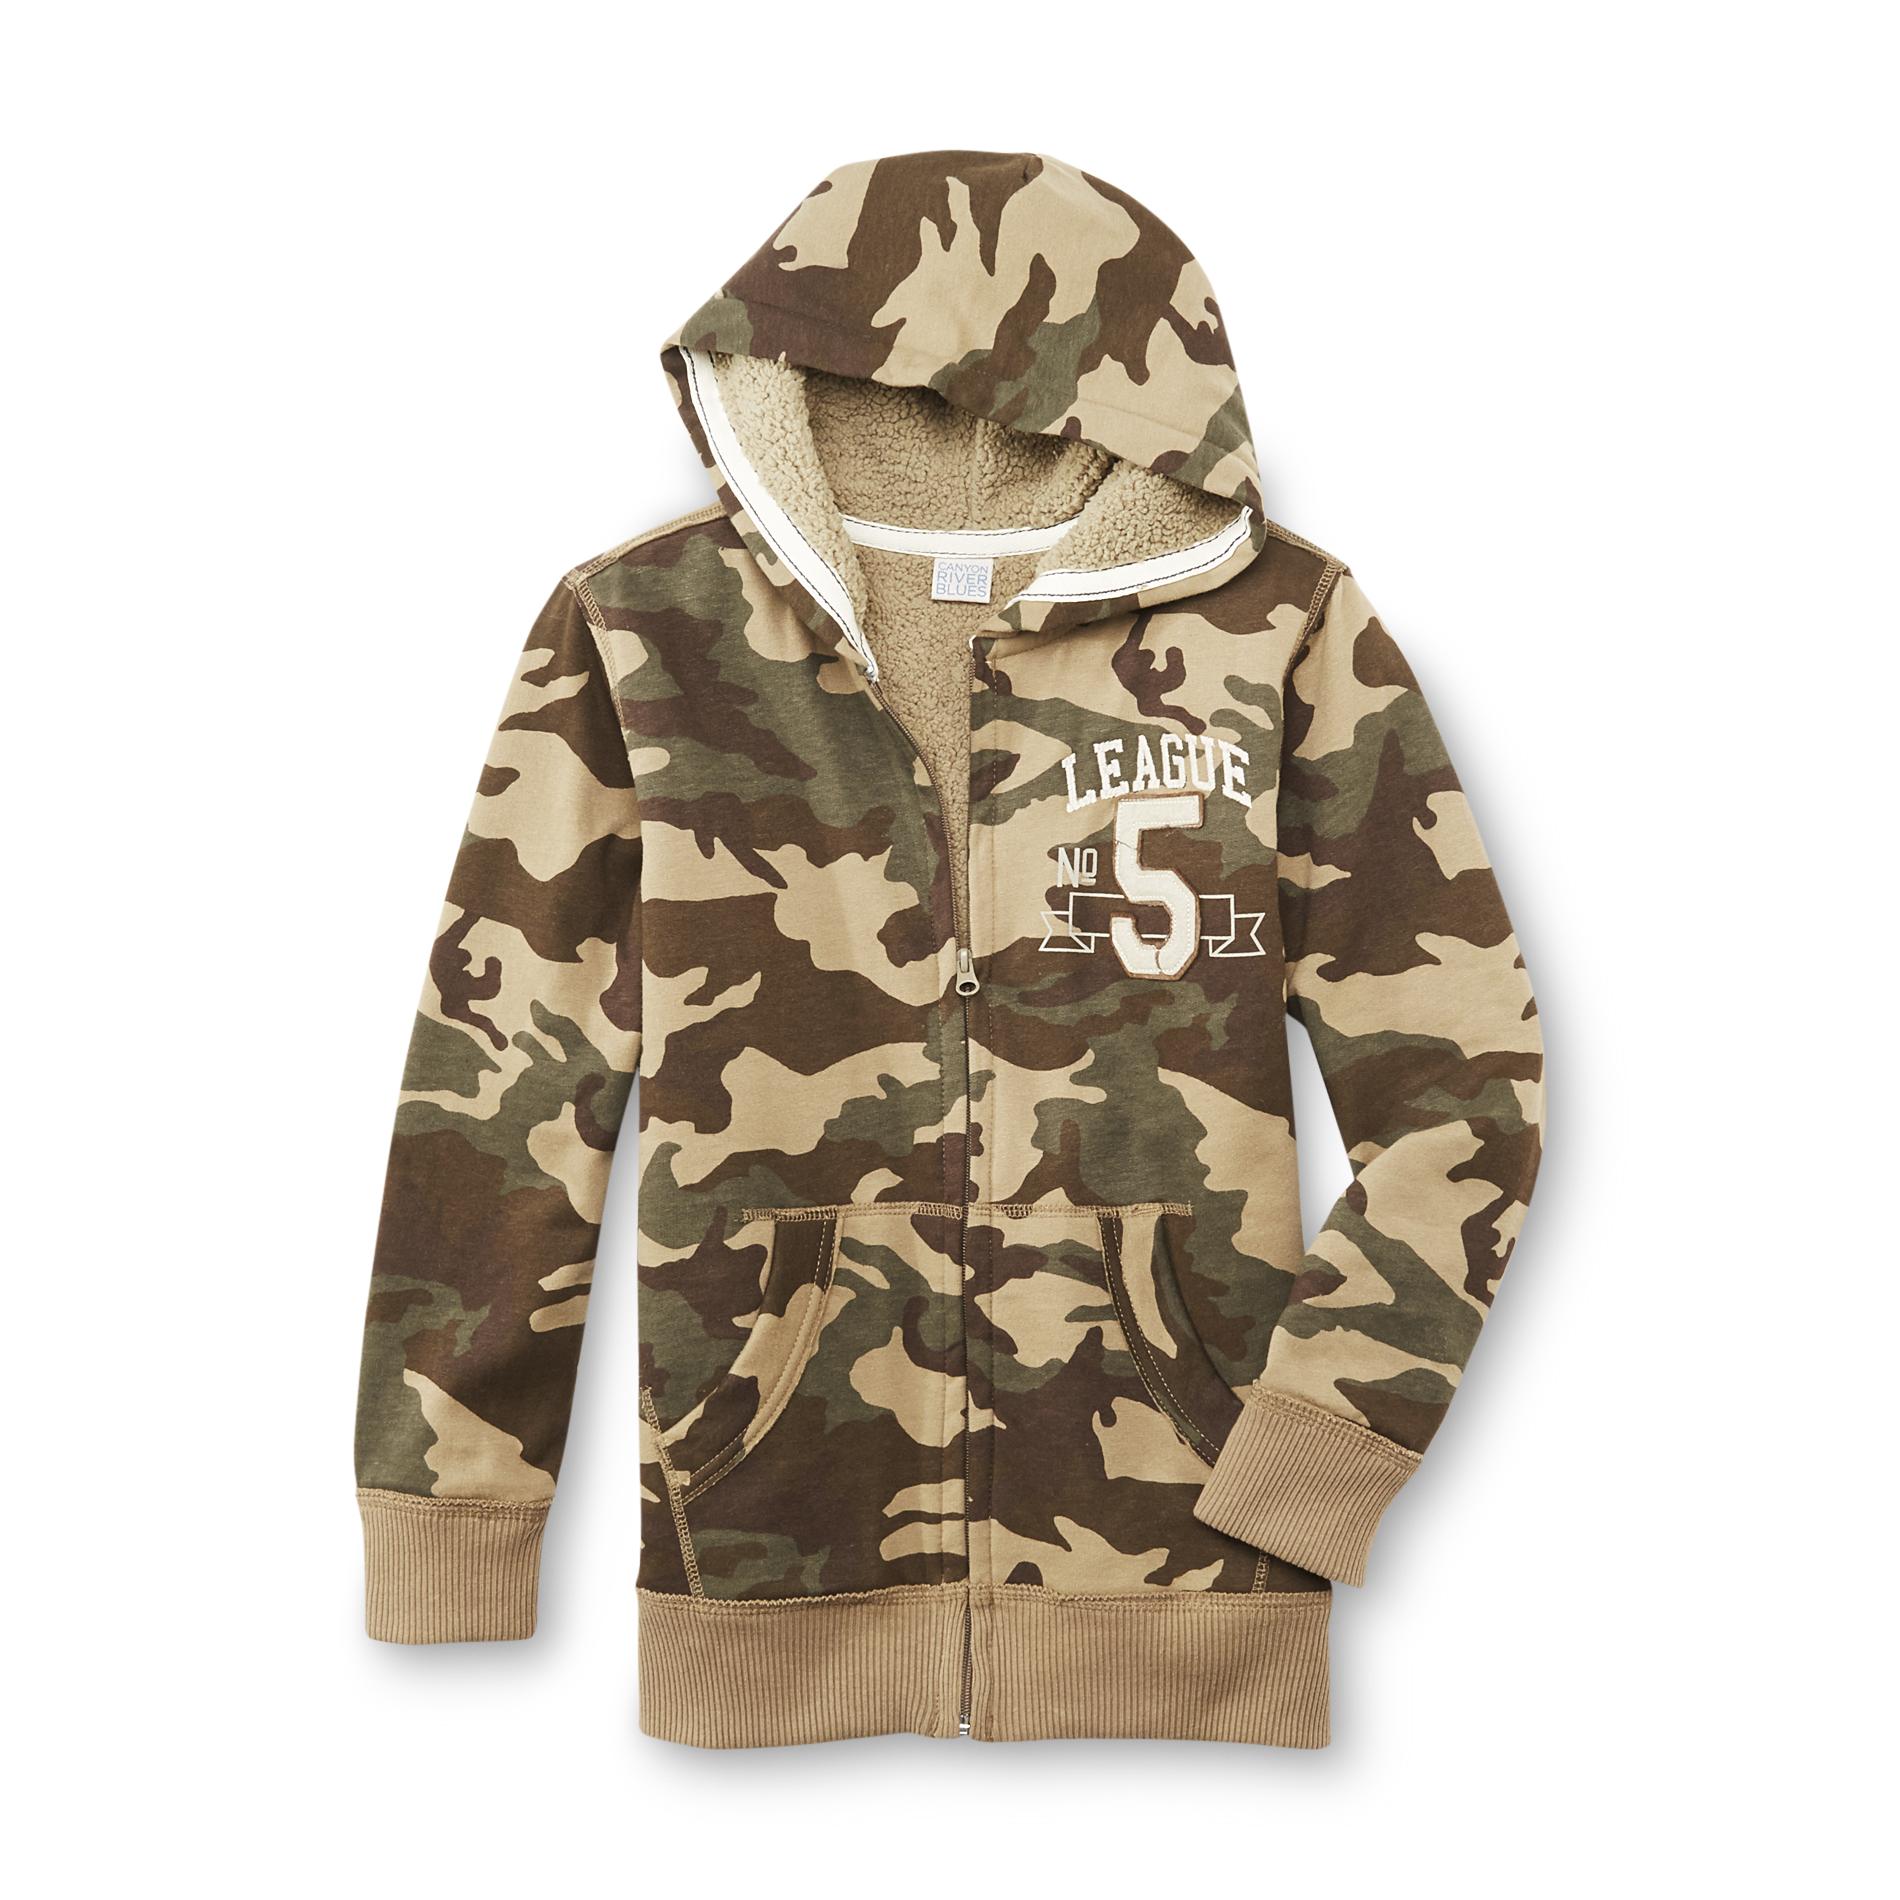 Canyon River Blues Boy's Hoodie Jacket - Camouflage